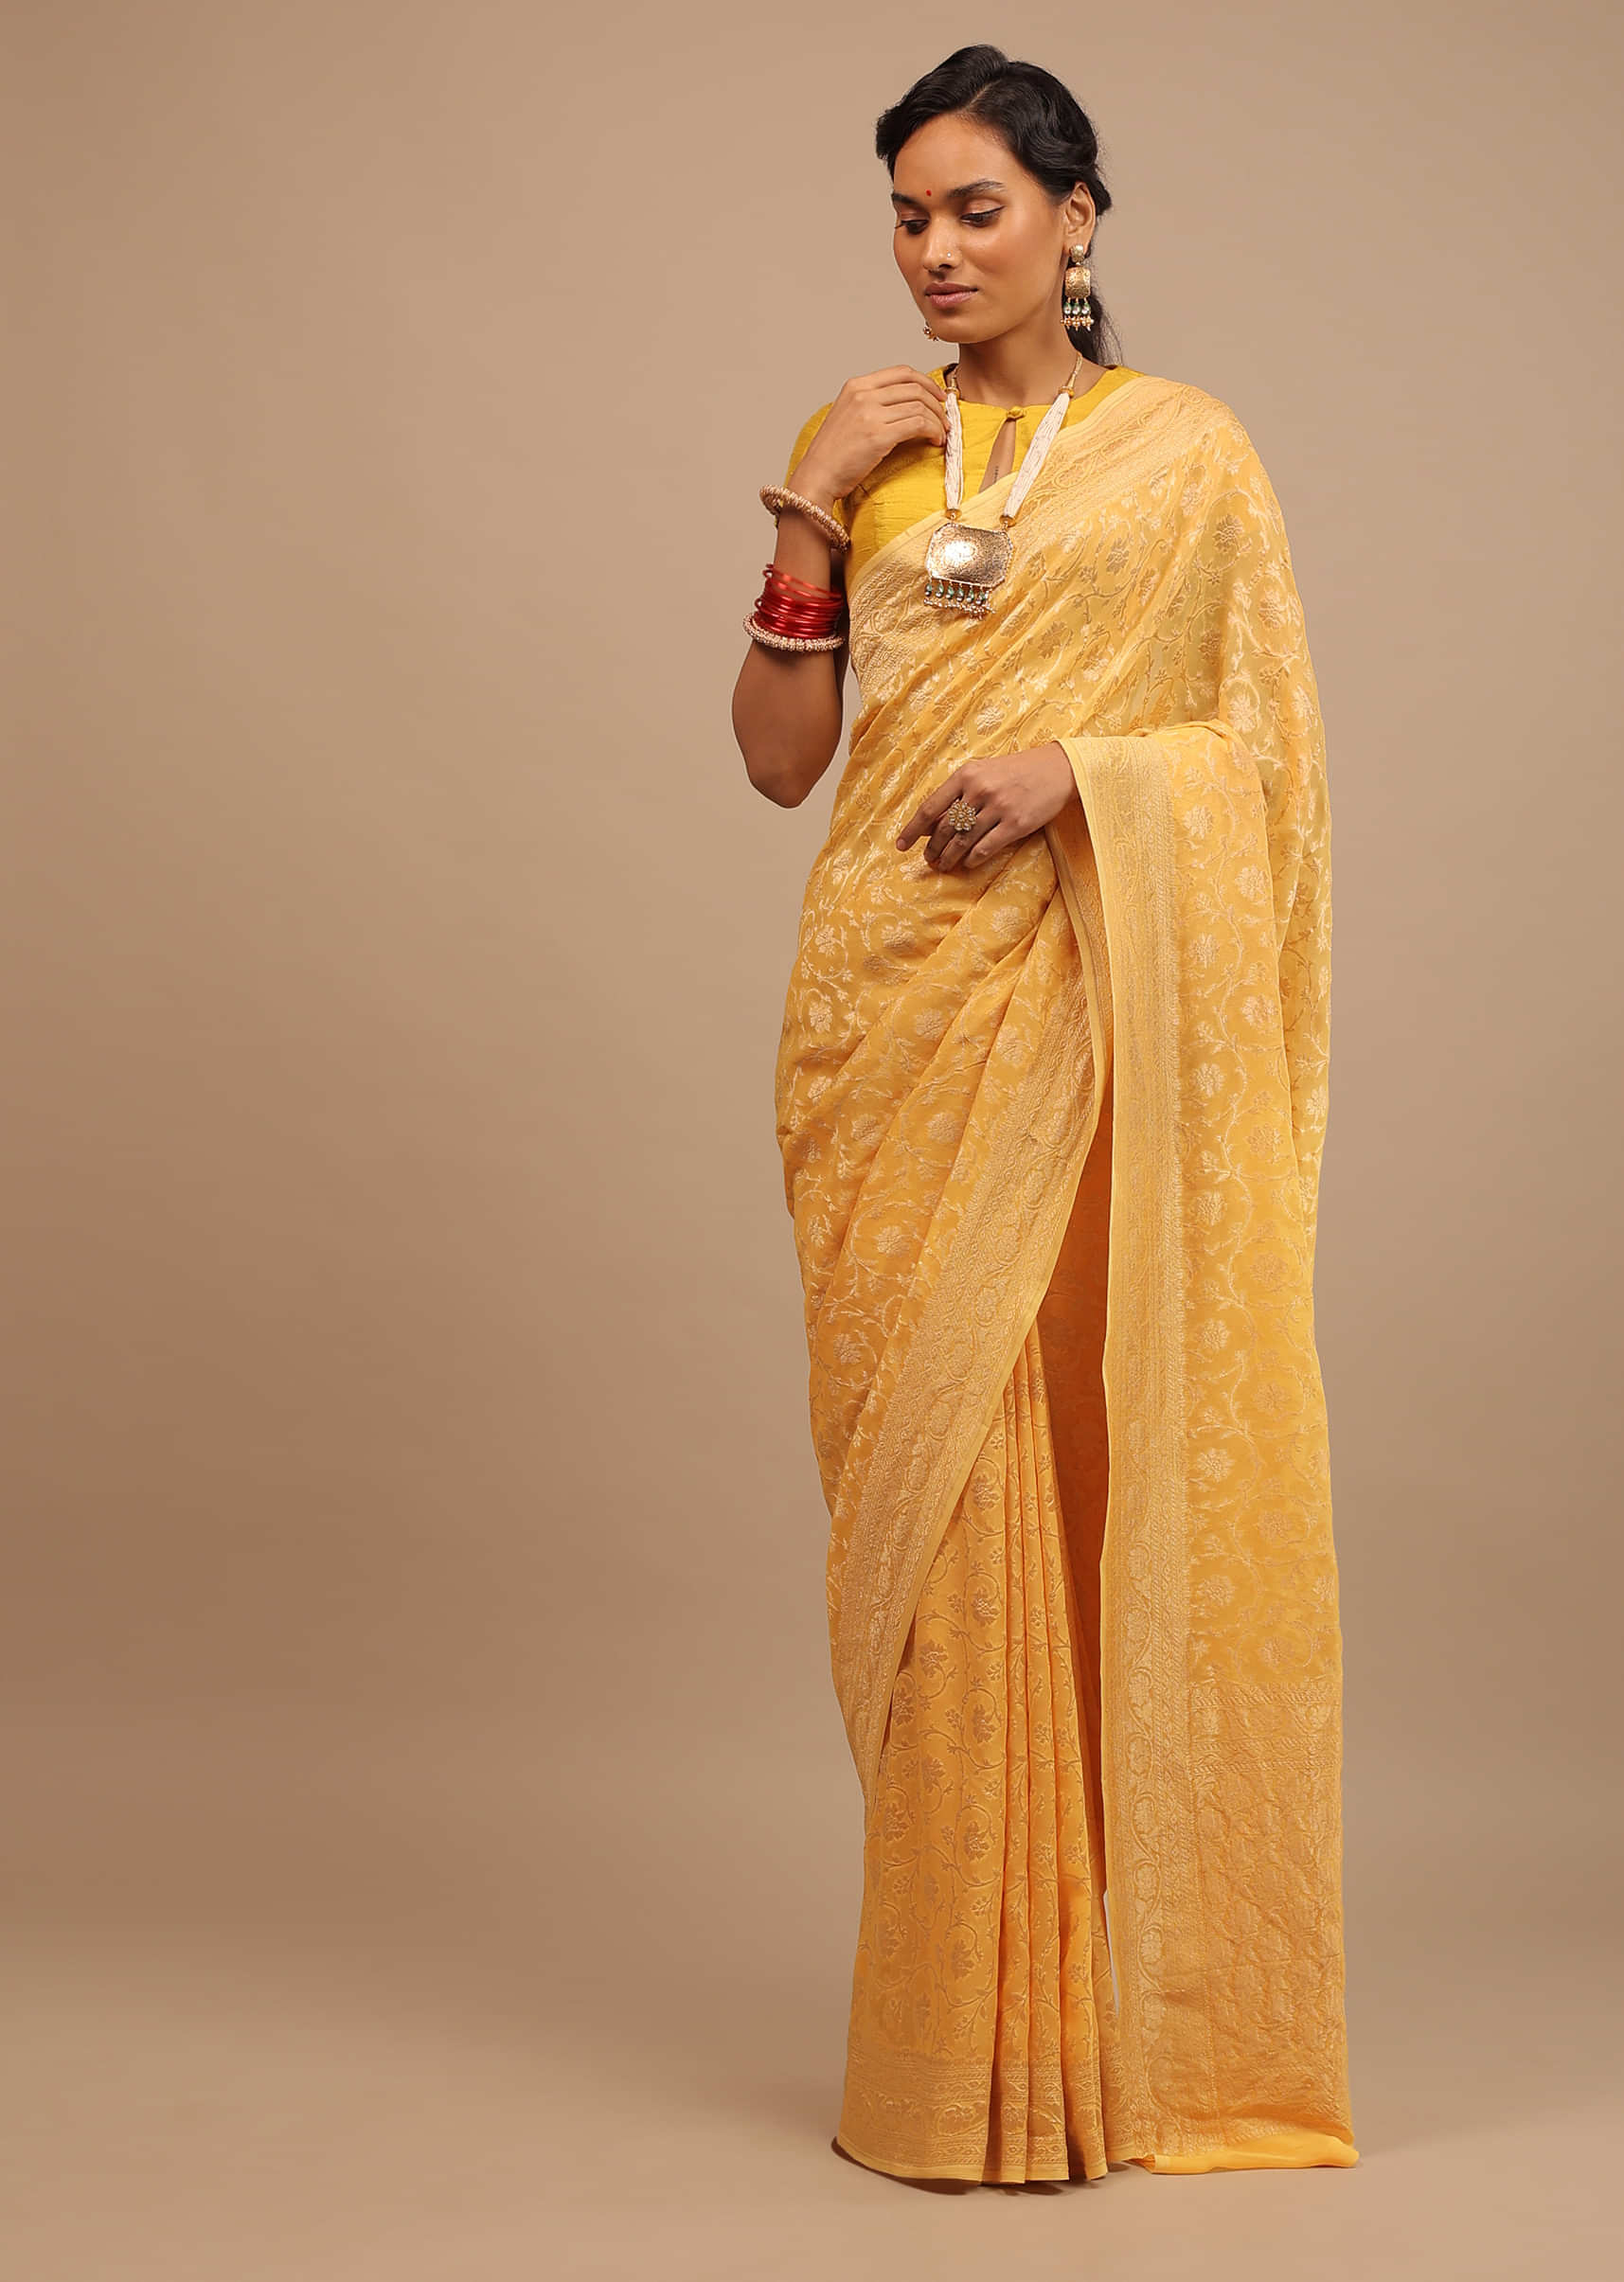 Daffodil Yellow Traditional Saree With Heavy Woven Brocade Work On The Border And Pallu